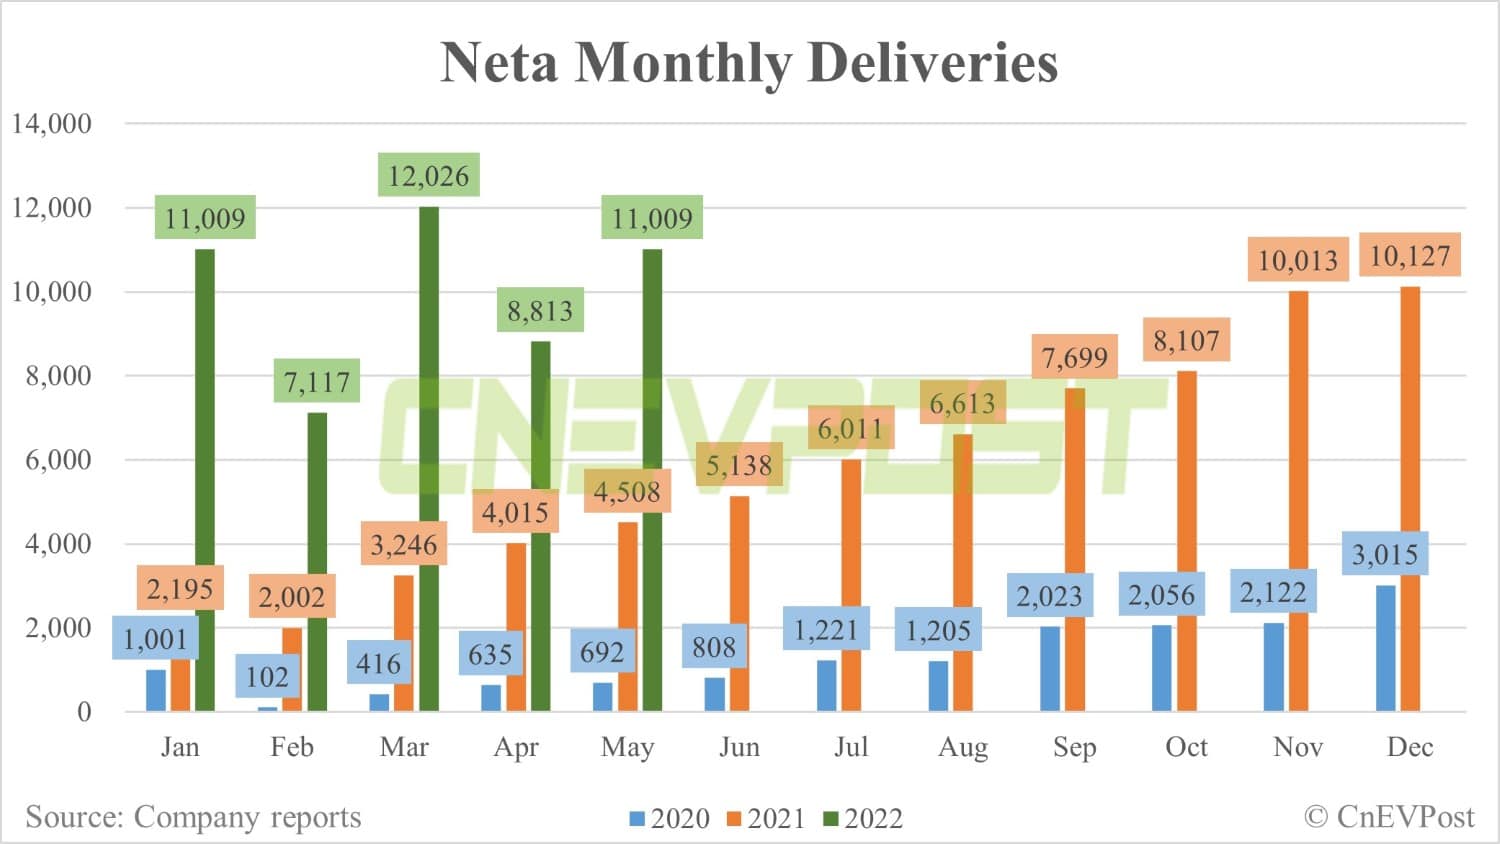 Neta delivers 11,009 vehicles in May, up 25% from April-CnEVPost